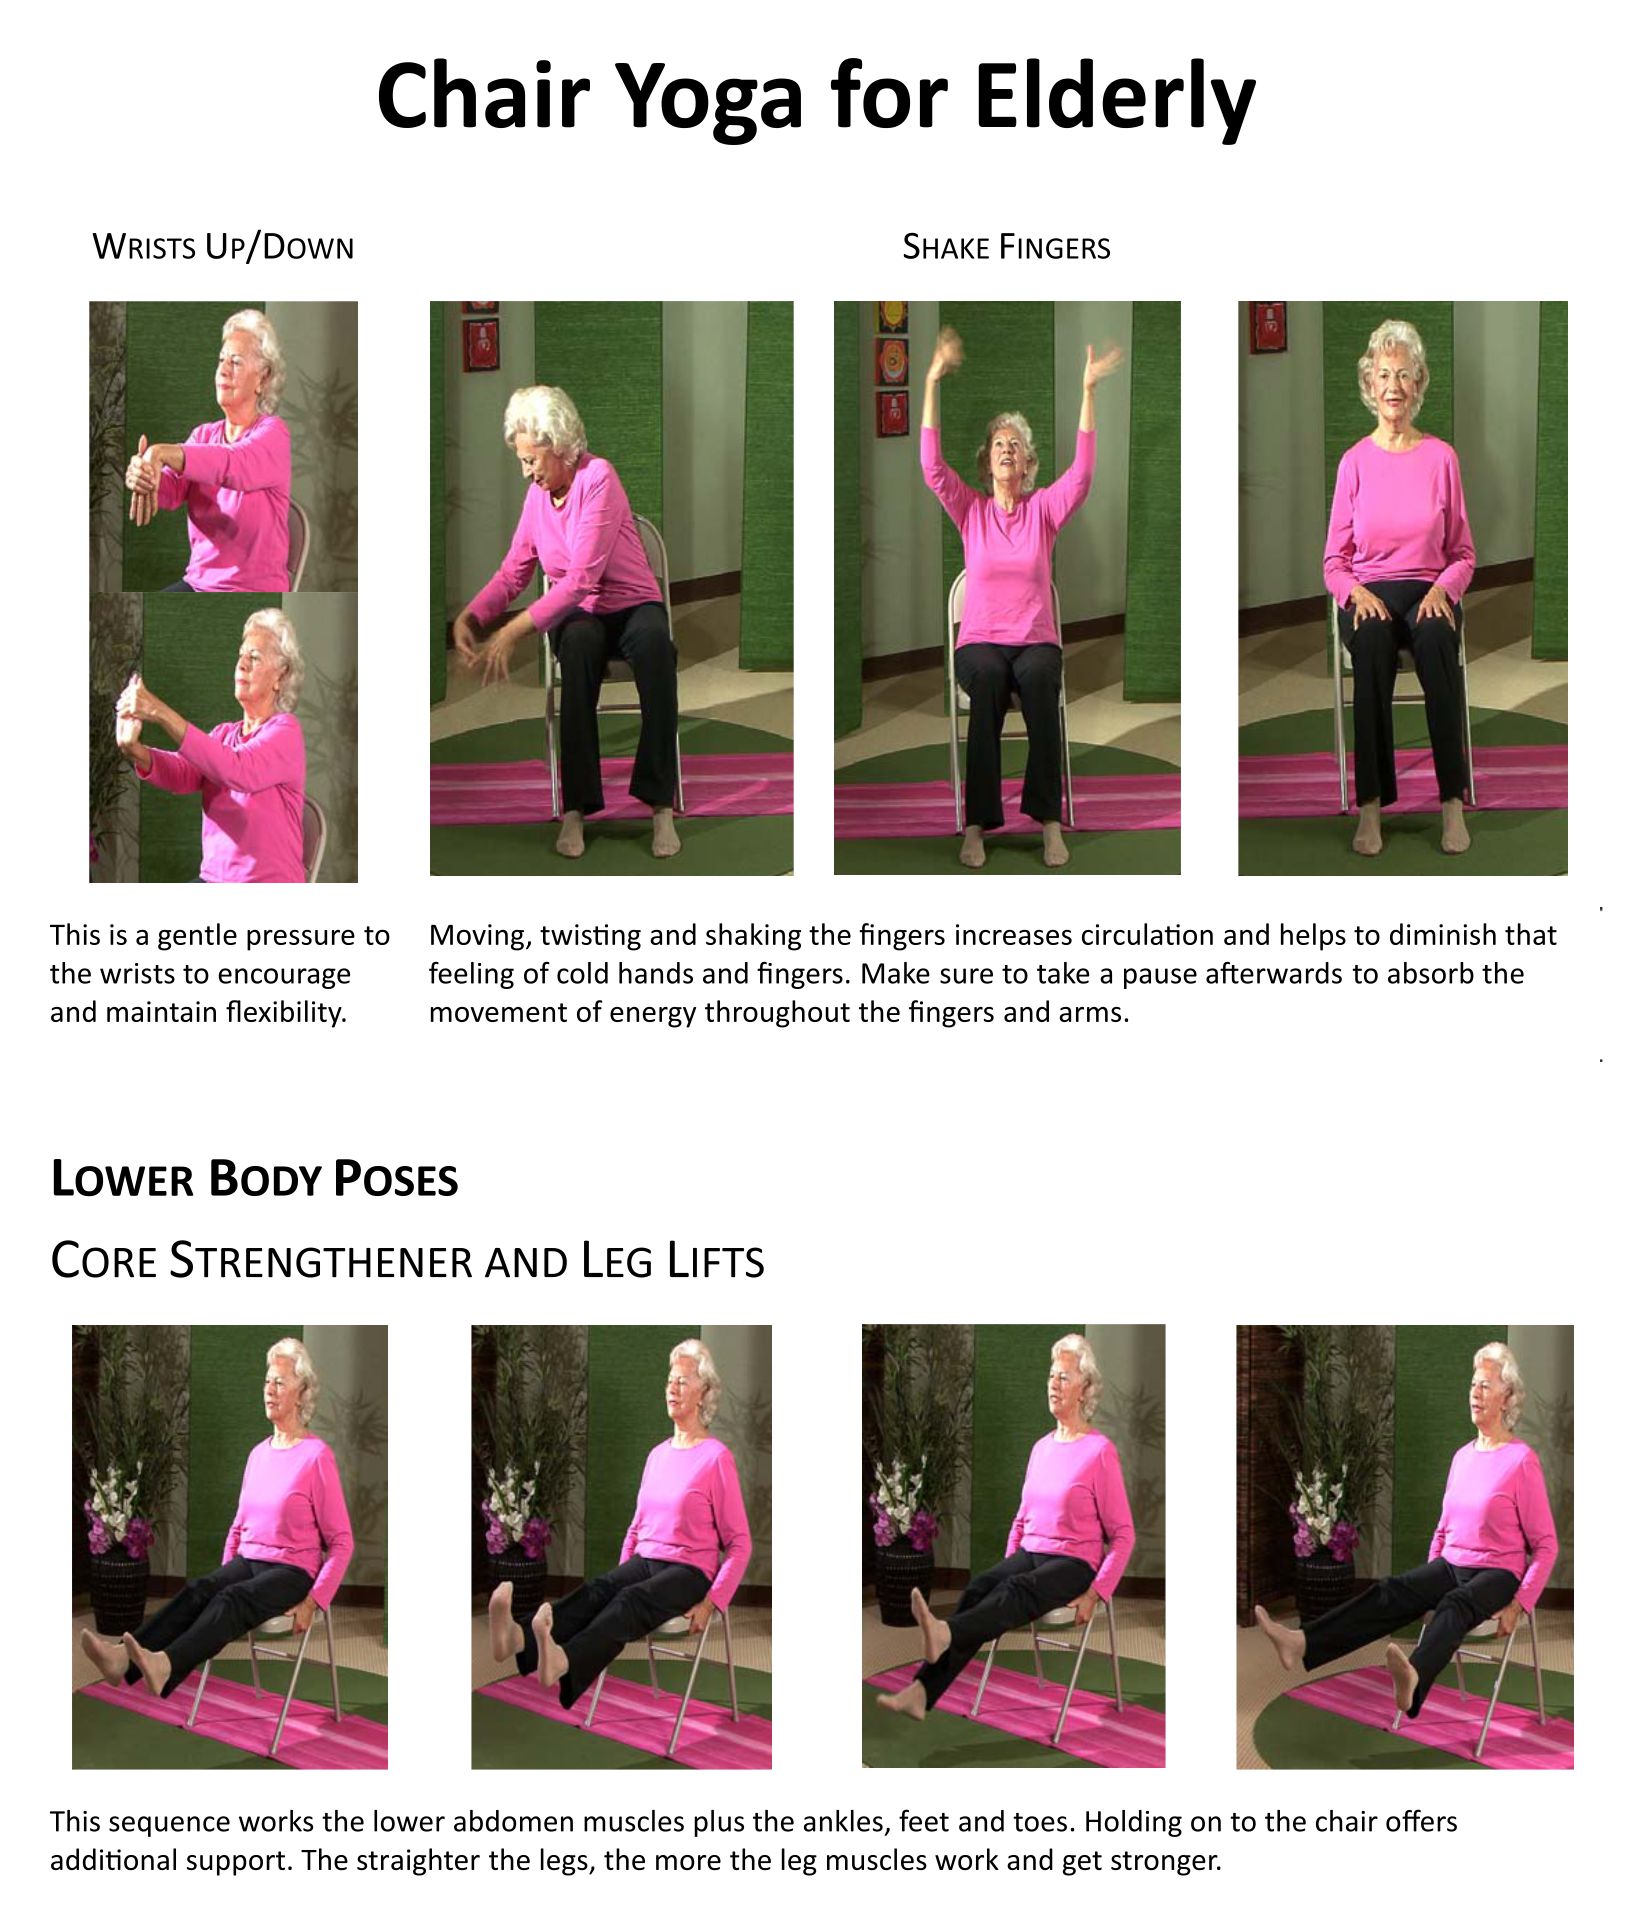 Why chair yoga is beneficial for seniors